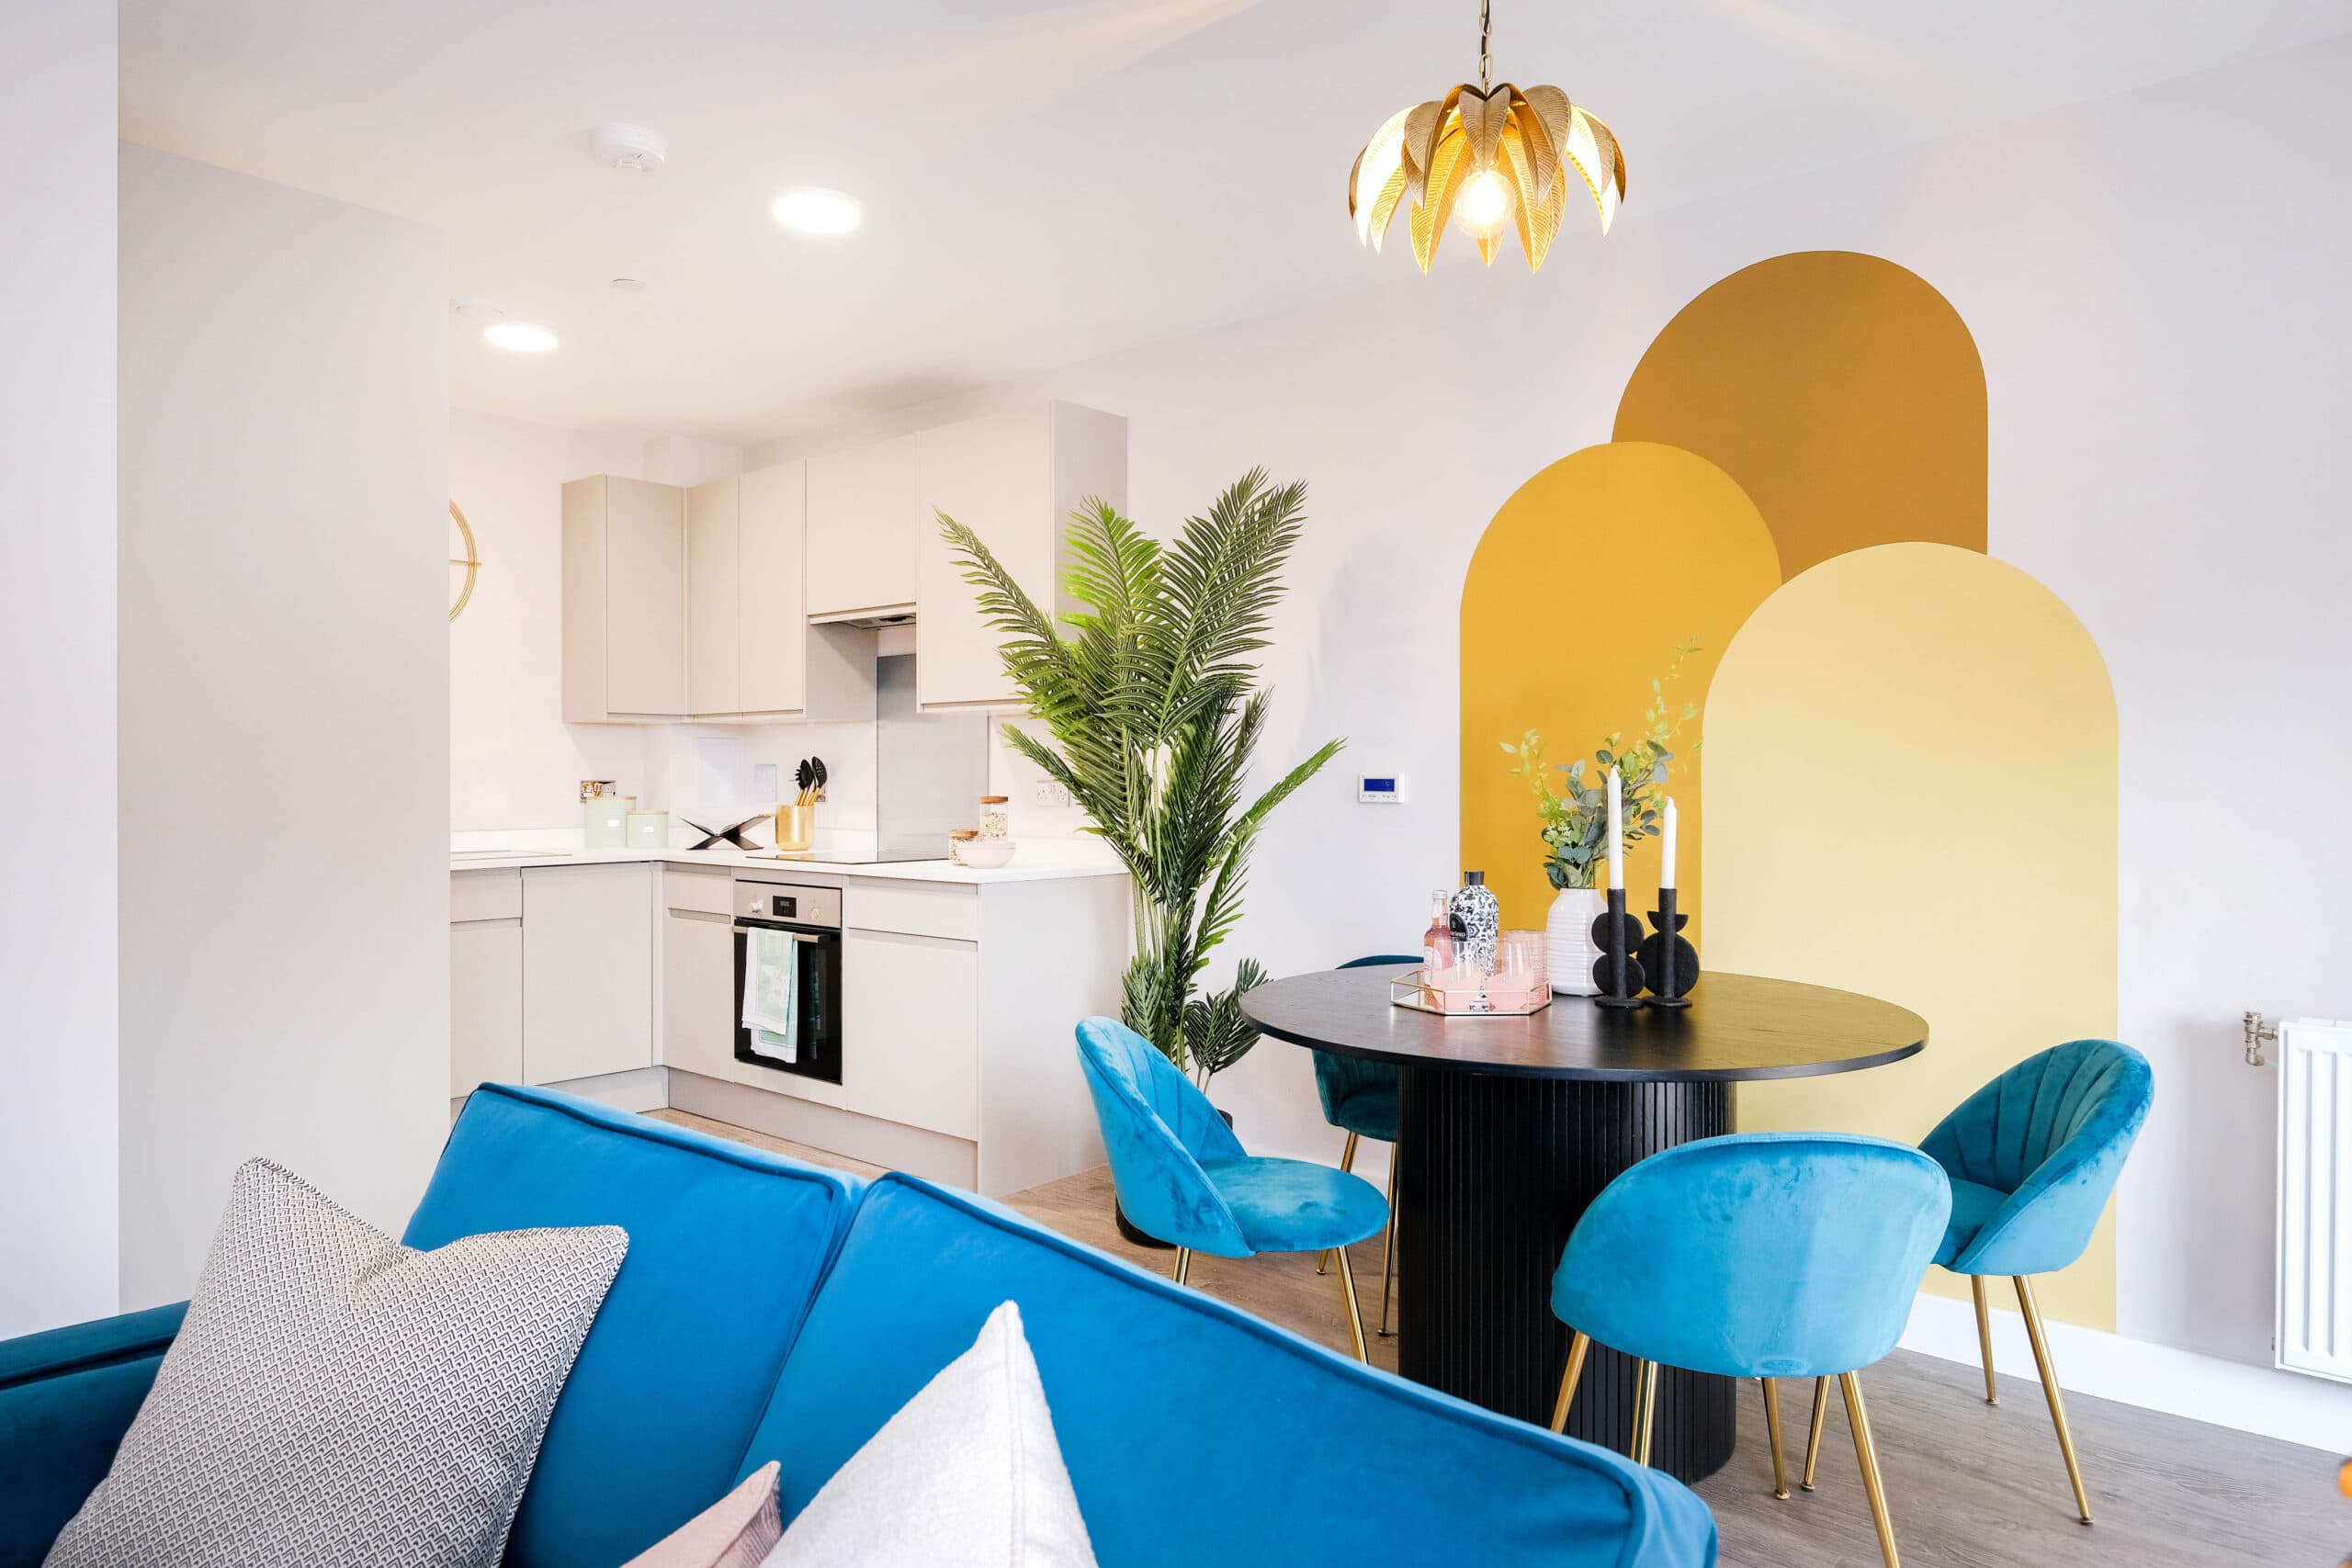 Image of the interior of The Bowery development from Latimer by Clarion Housing Group - available to purchase through Shared Ownership on Share to Buy!